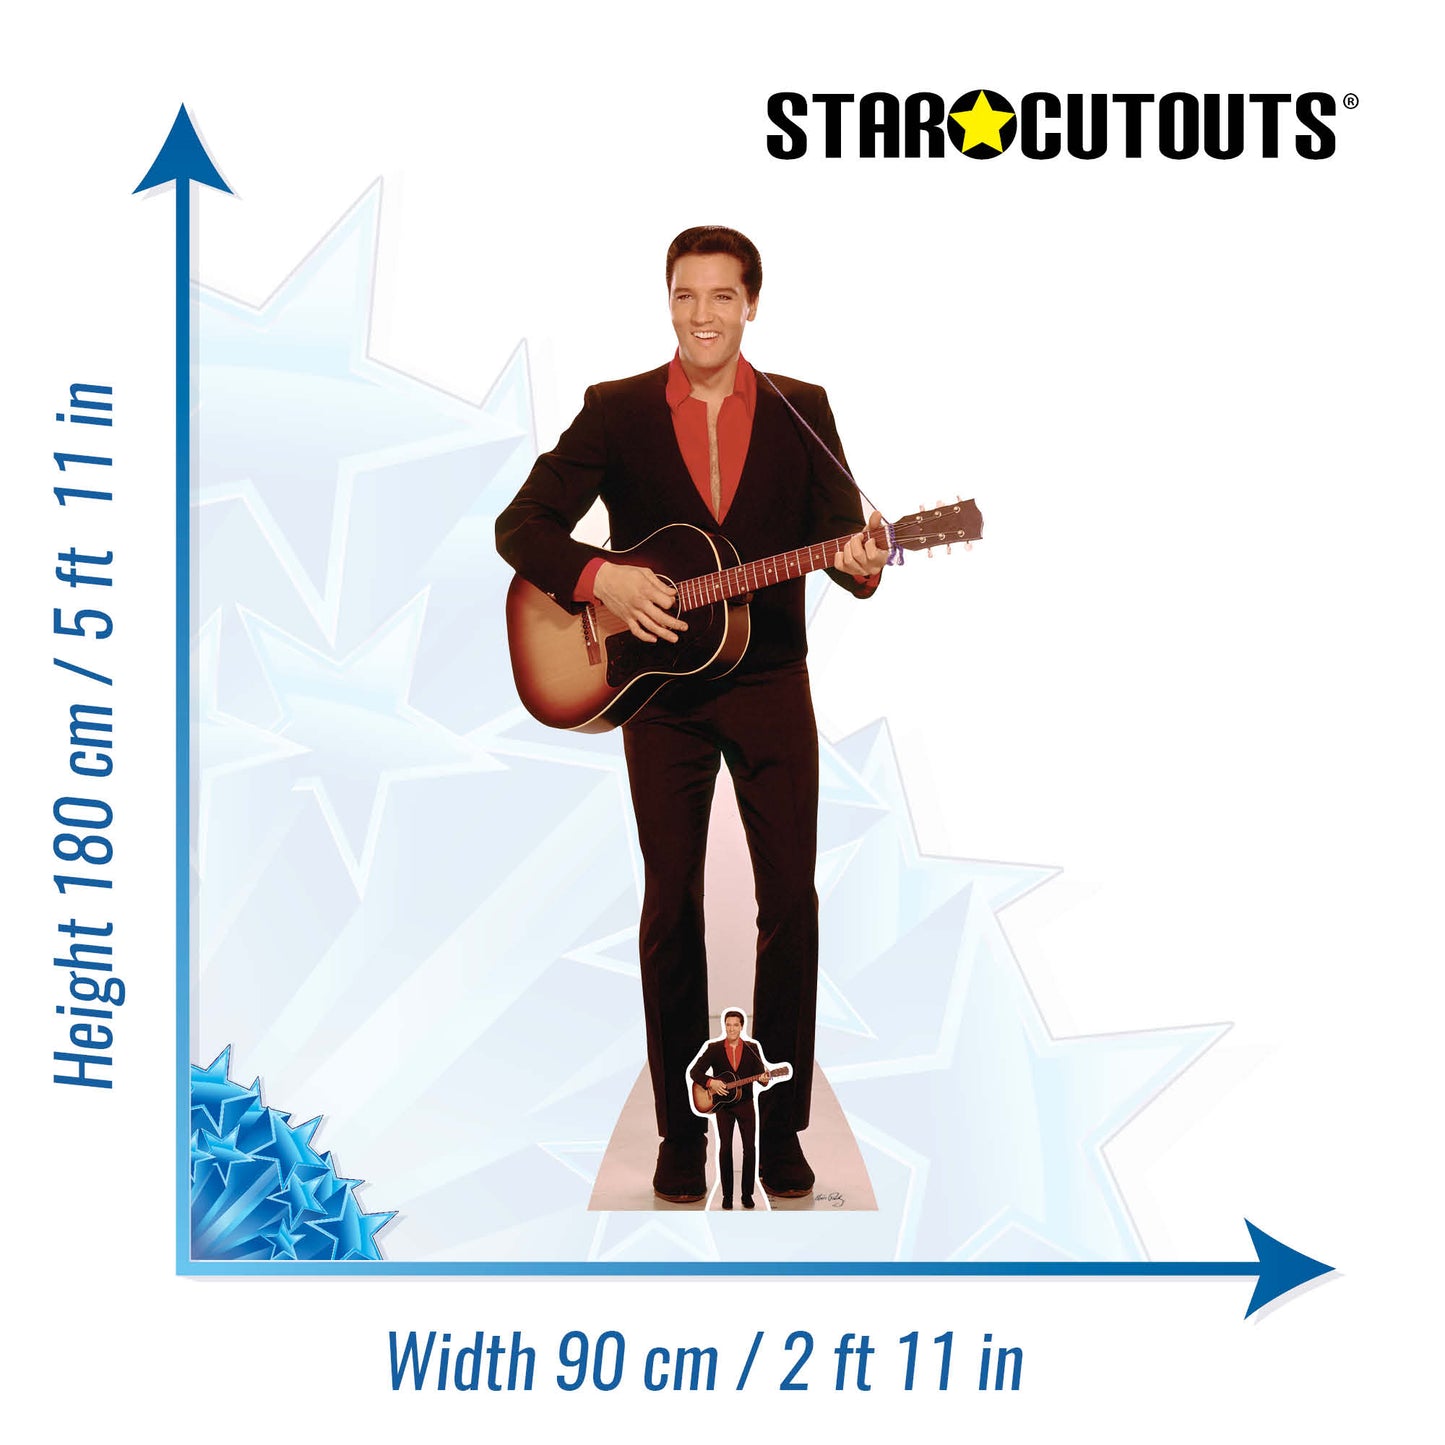 SC241 Elvis Presley Red Shirt and Guitar Cardboard Cut Out Height 180cm